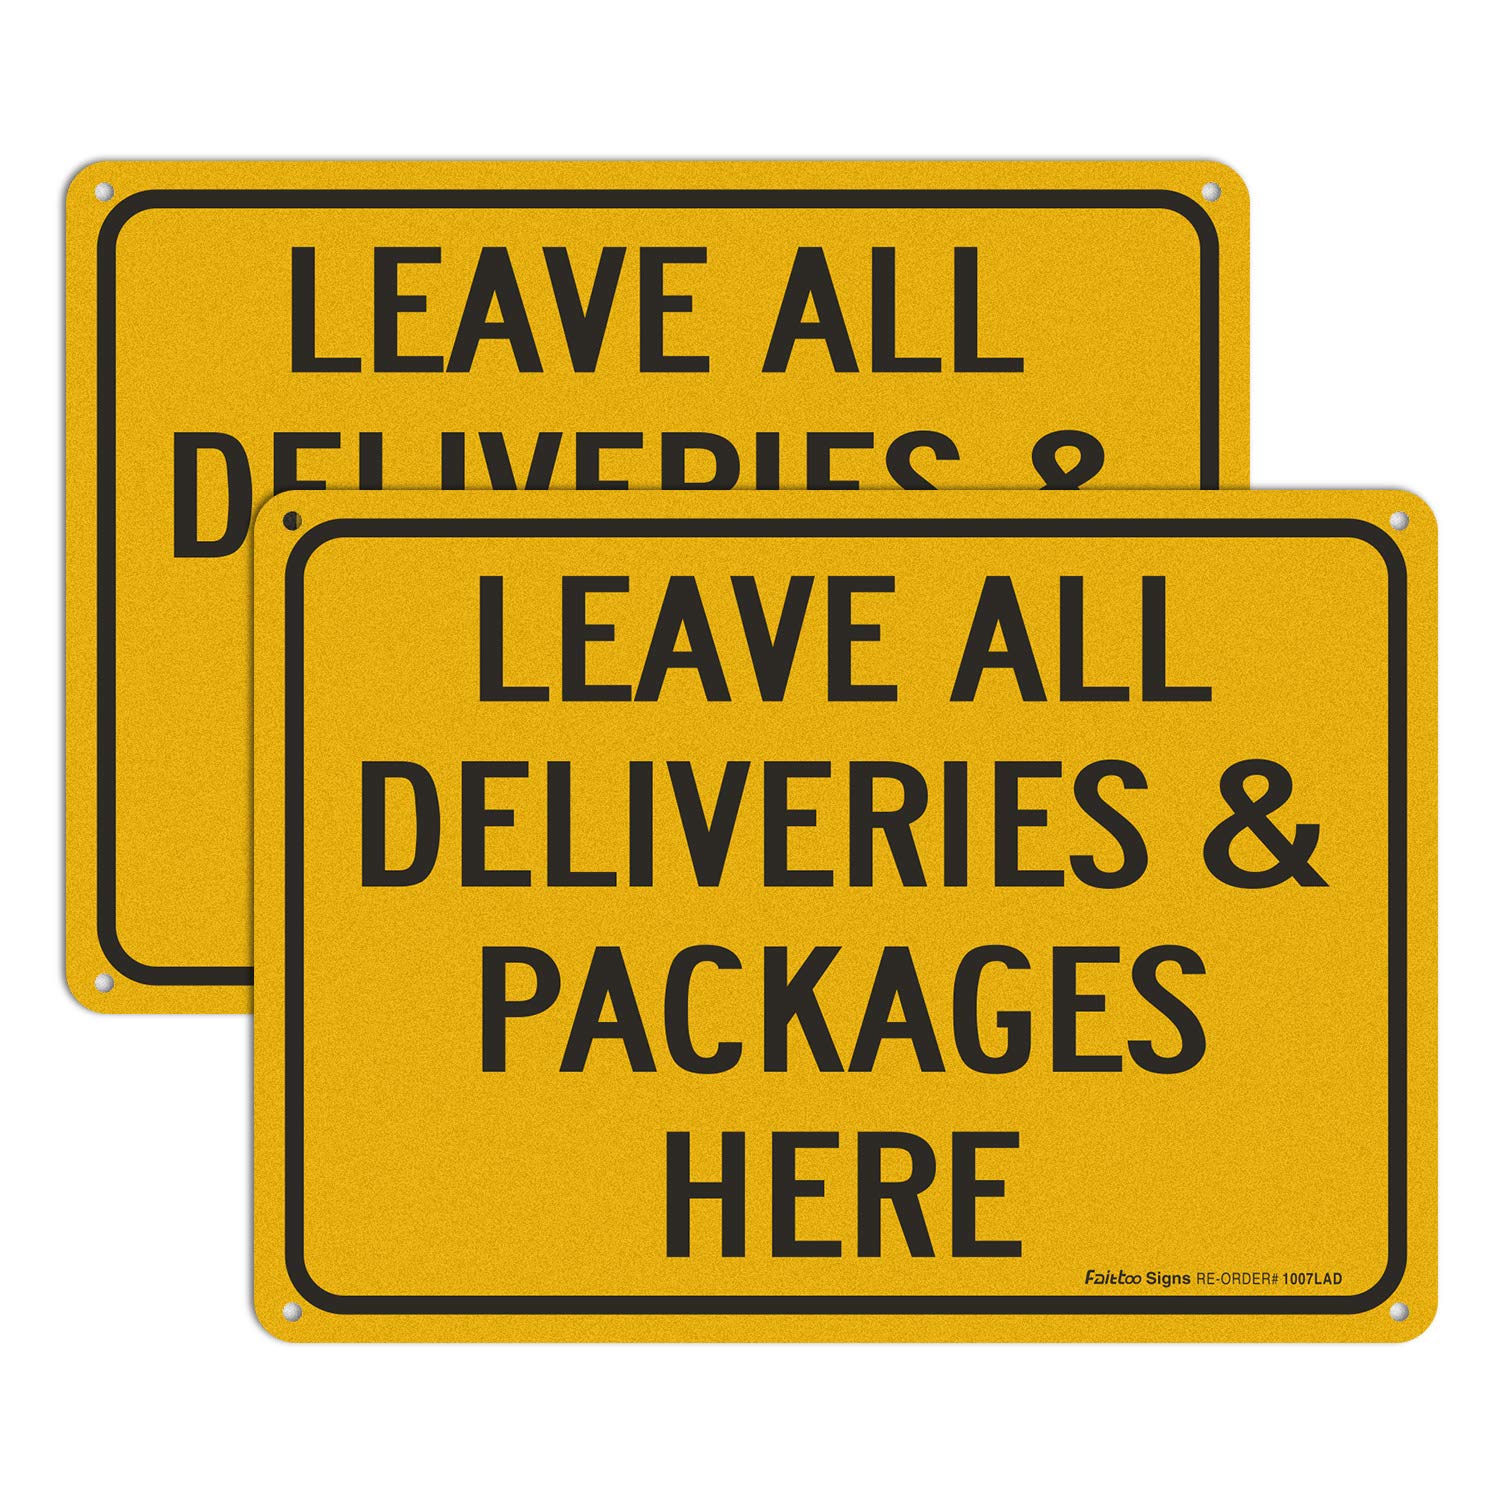 Leave all Deliveries &amp; Packages Here Sign,10x7 Inch Rust Free Aluminum Metal Sign, Reflective, Fade/Weather Resistant, Easy to Mount, UV Protected, Indoor/Outdoor Use